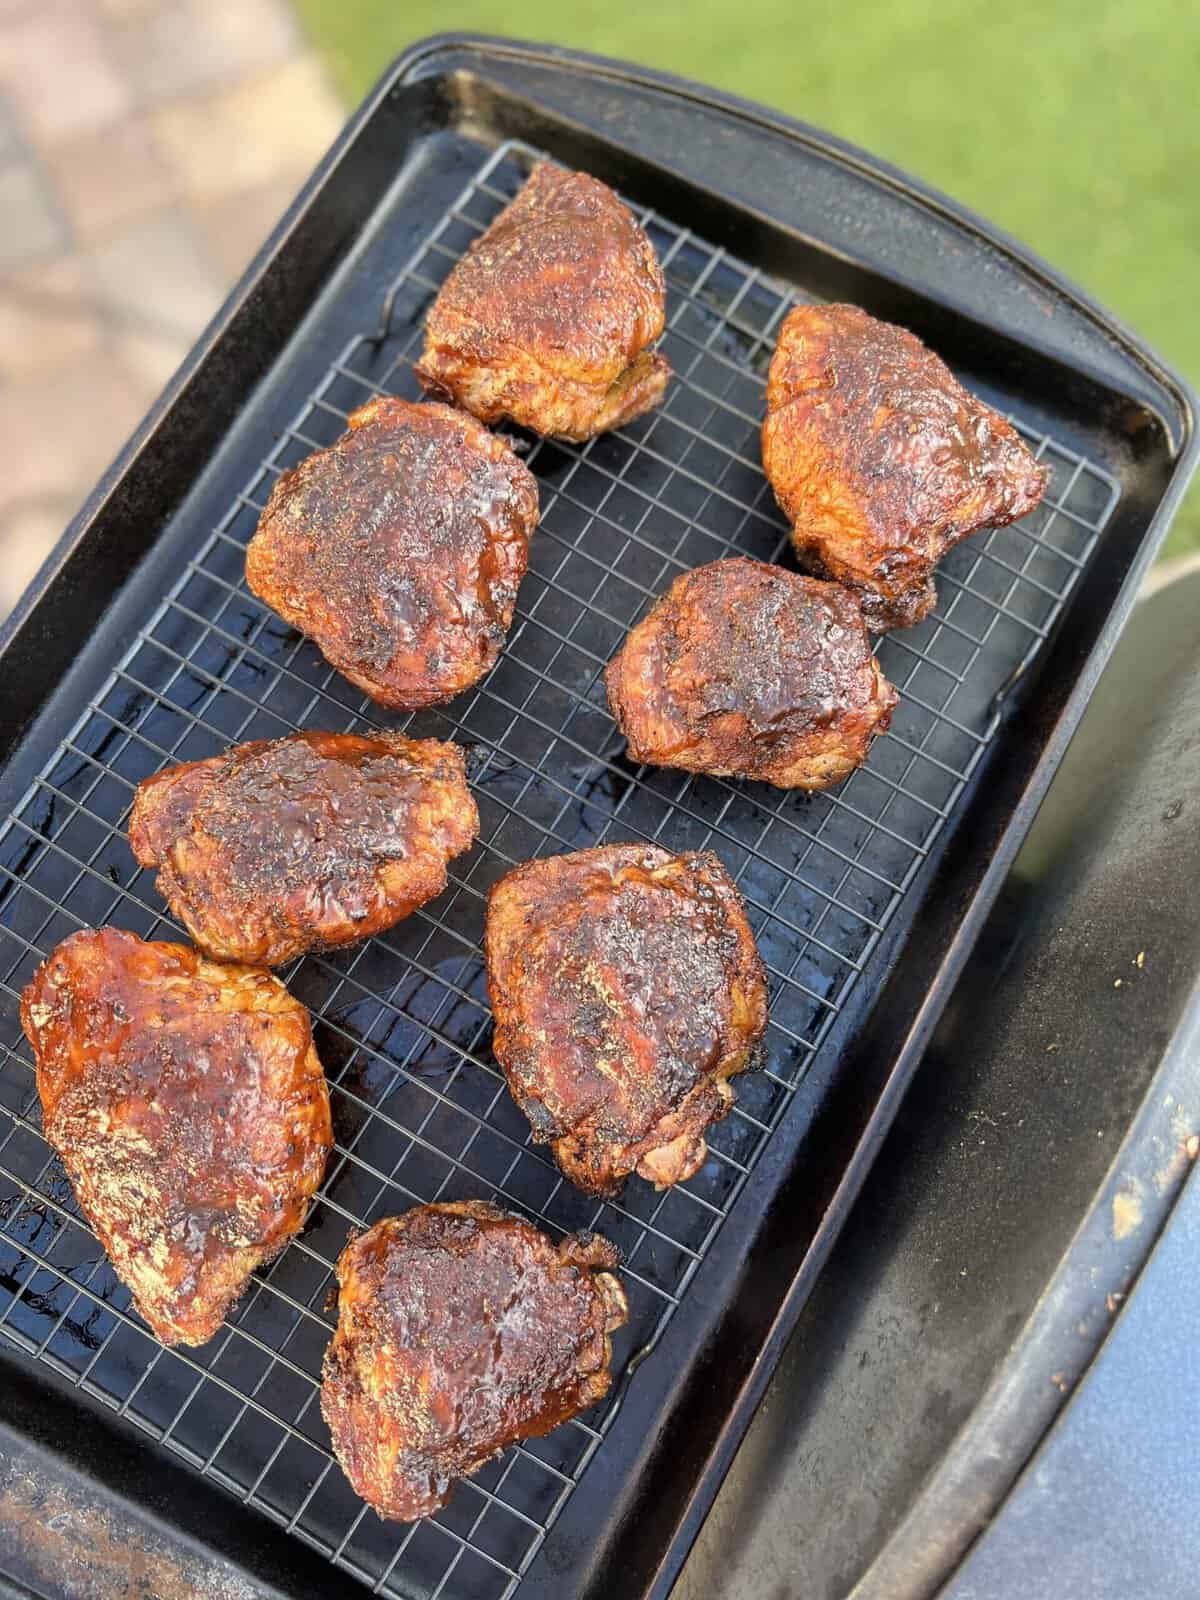 Smoked chicken thighs on a baking sheet on the side of a grill.